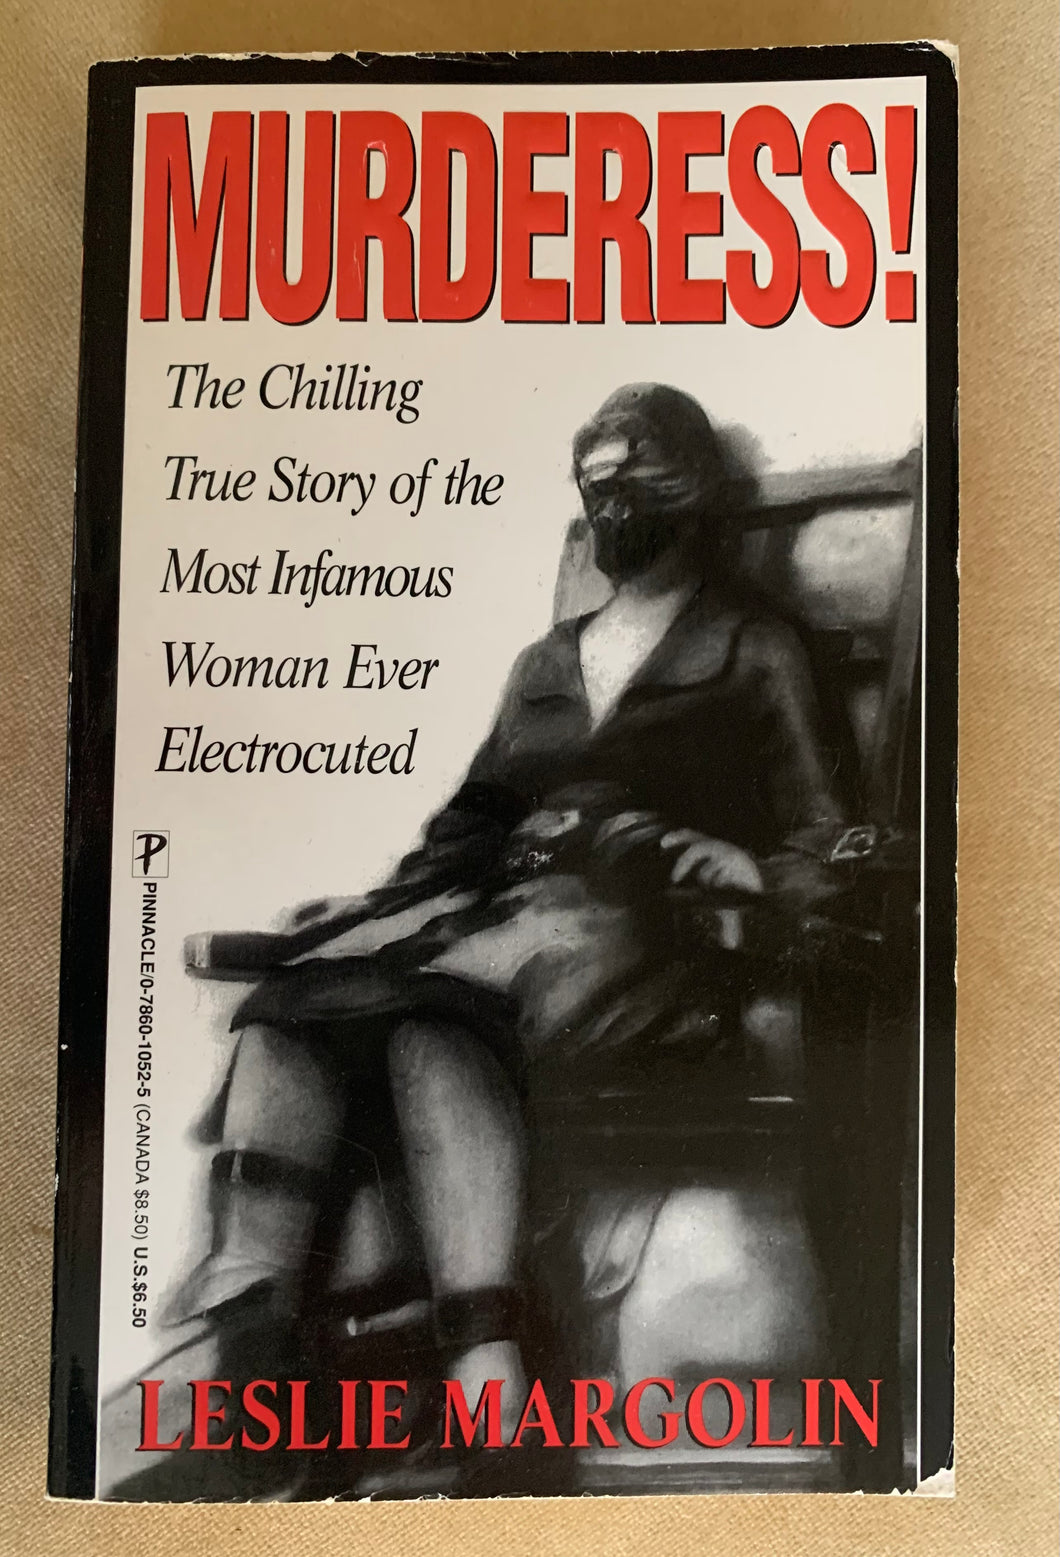 Murderess!: The Chilling True Story of the Most Infamous Woman Ever Electrocuted